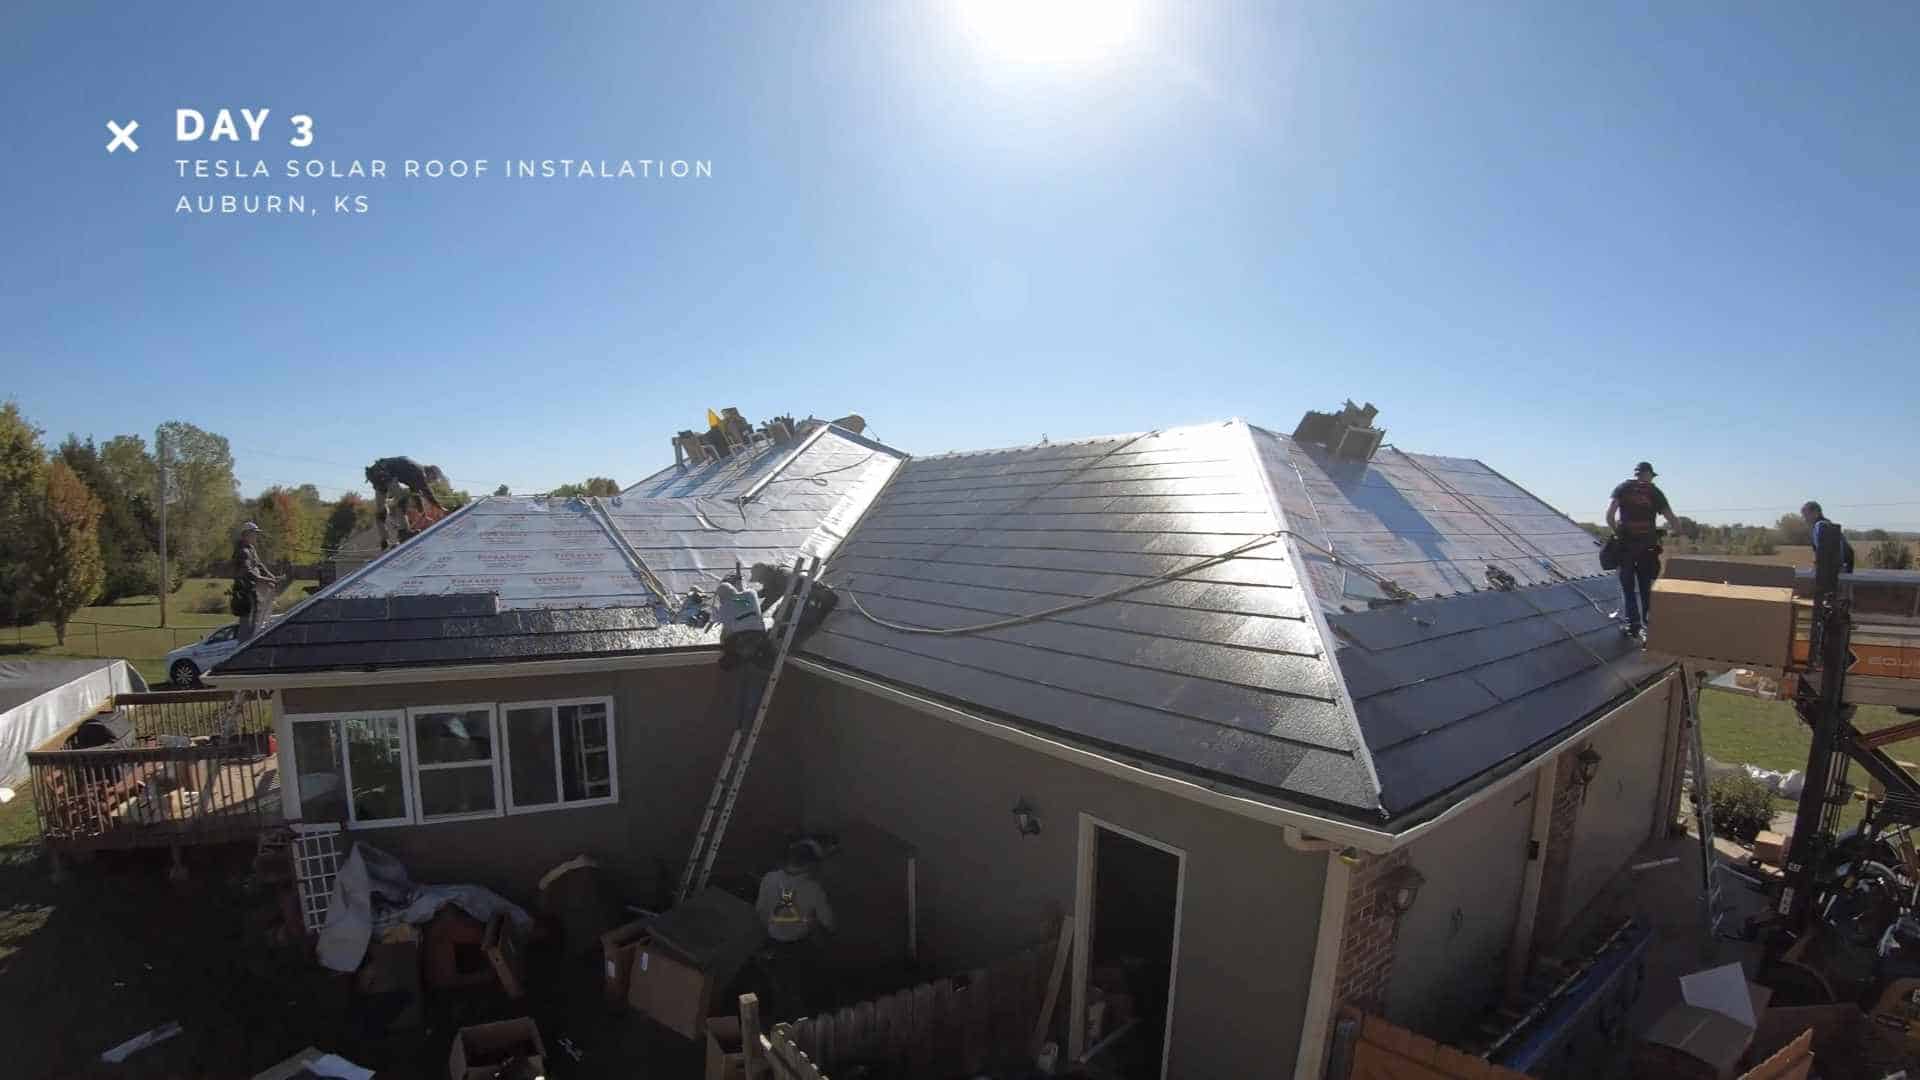 Weddle & Sons Solar Roof Install Day 3